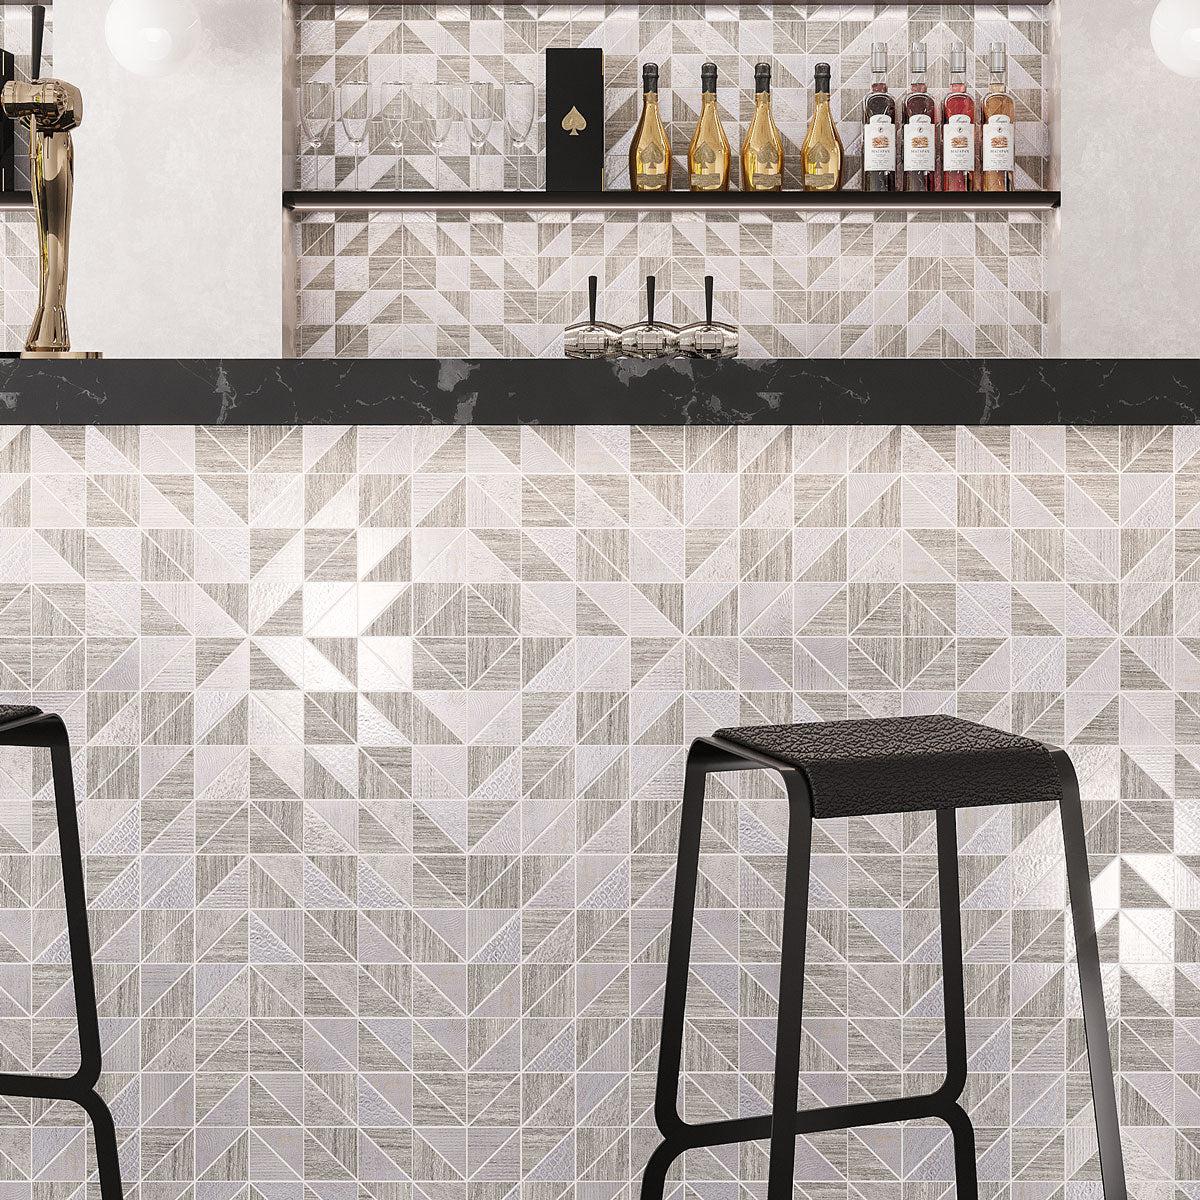 Unique geometric tile with marble and metallic textures for a wine bar